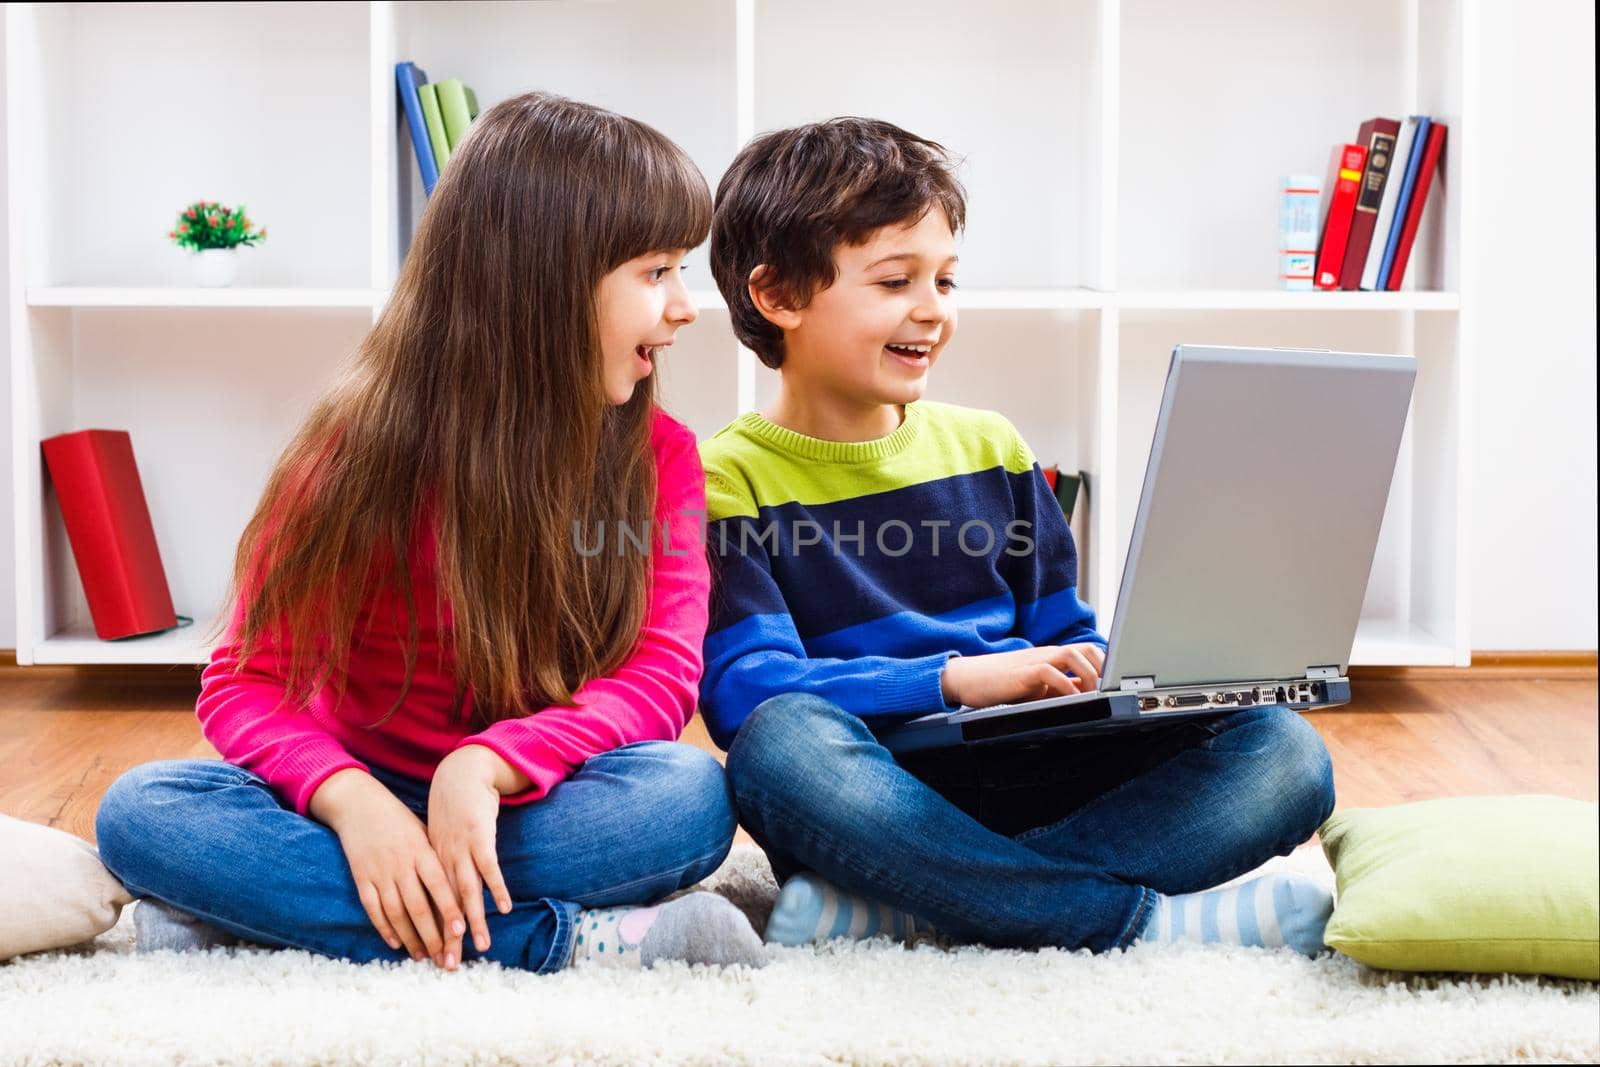 Image of children using laptop at home.